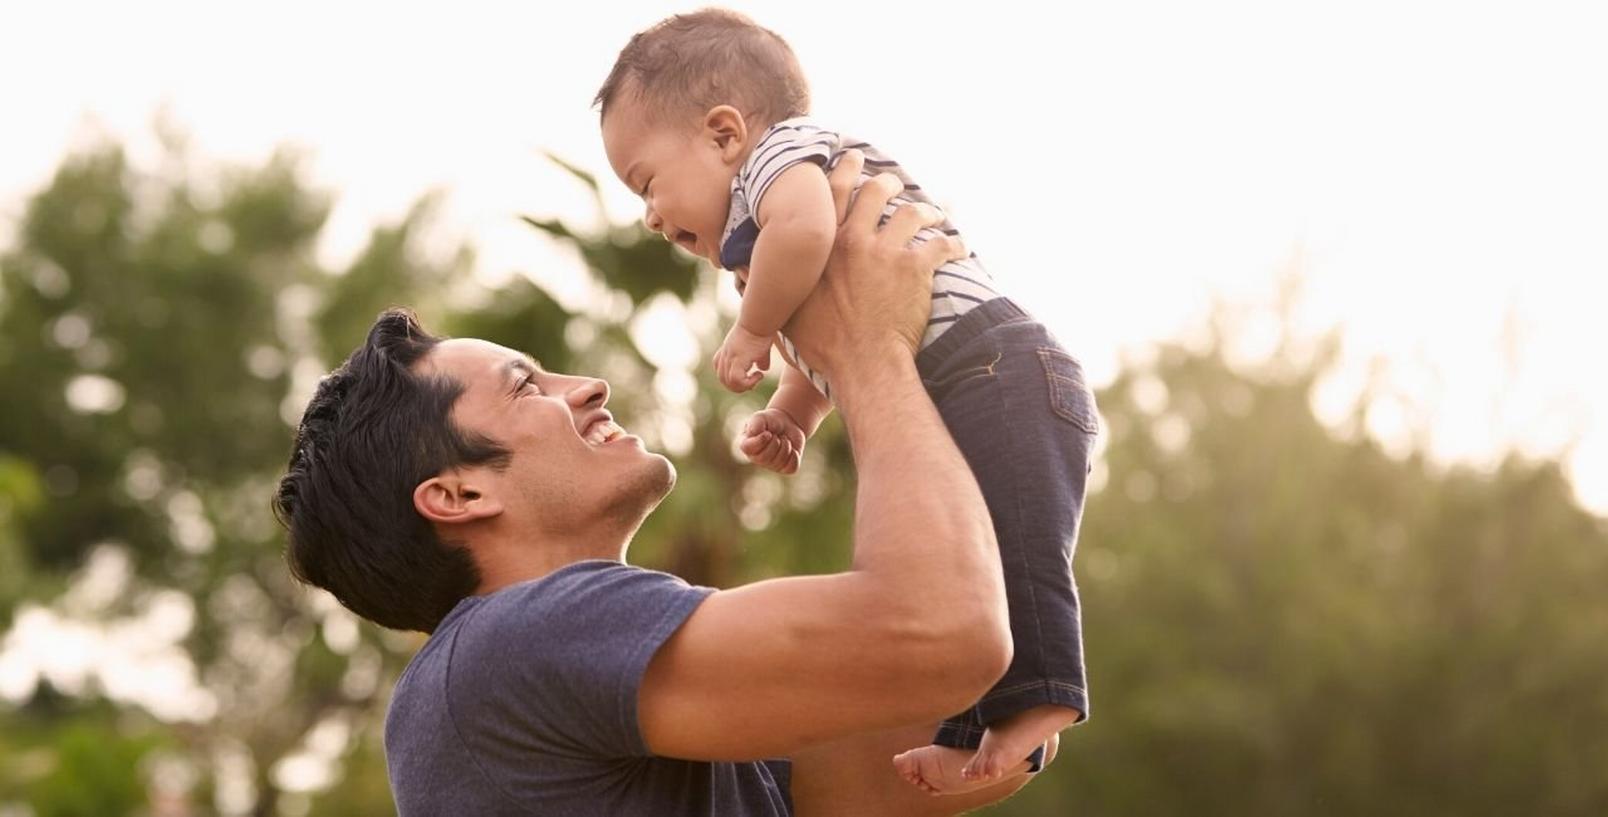 new-dad-with-baby-outdoors-playing